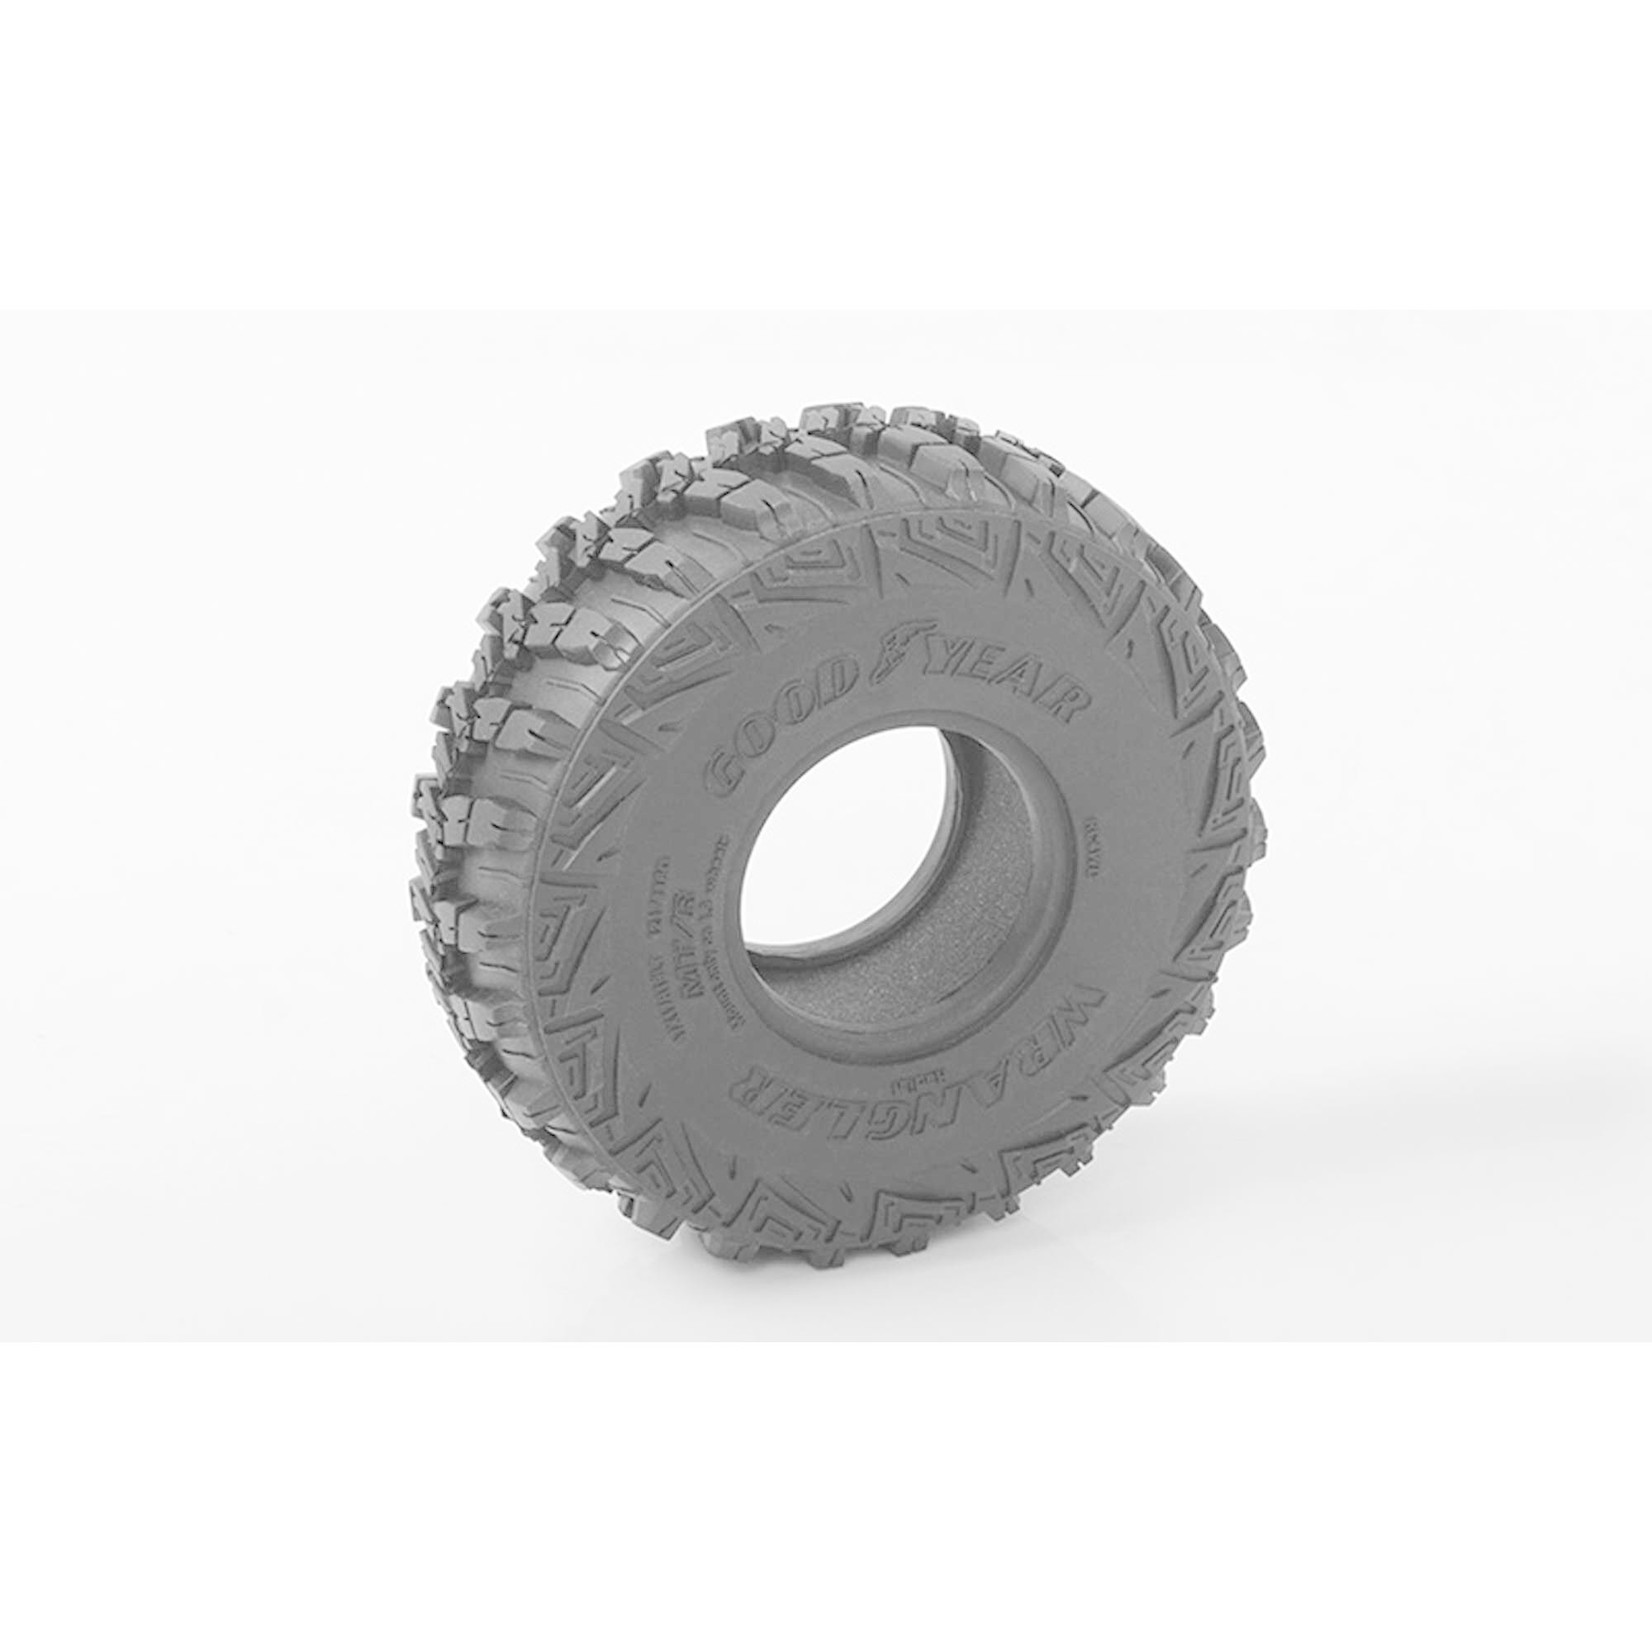 RC4WD Goodyear Wrangler MT/R 1.9, 4.75 Scale Tires (2)